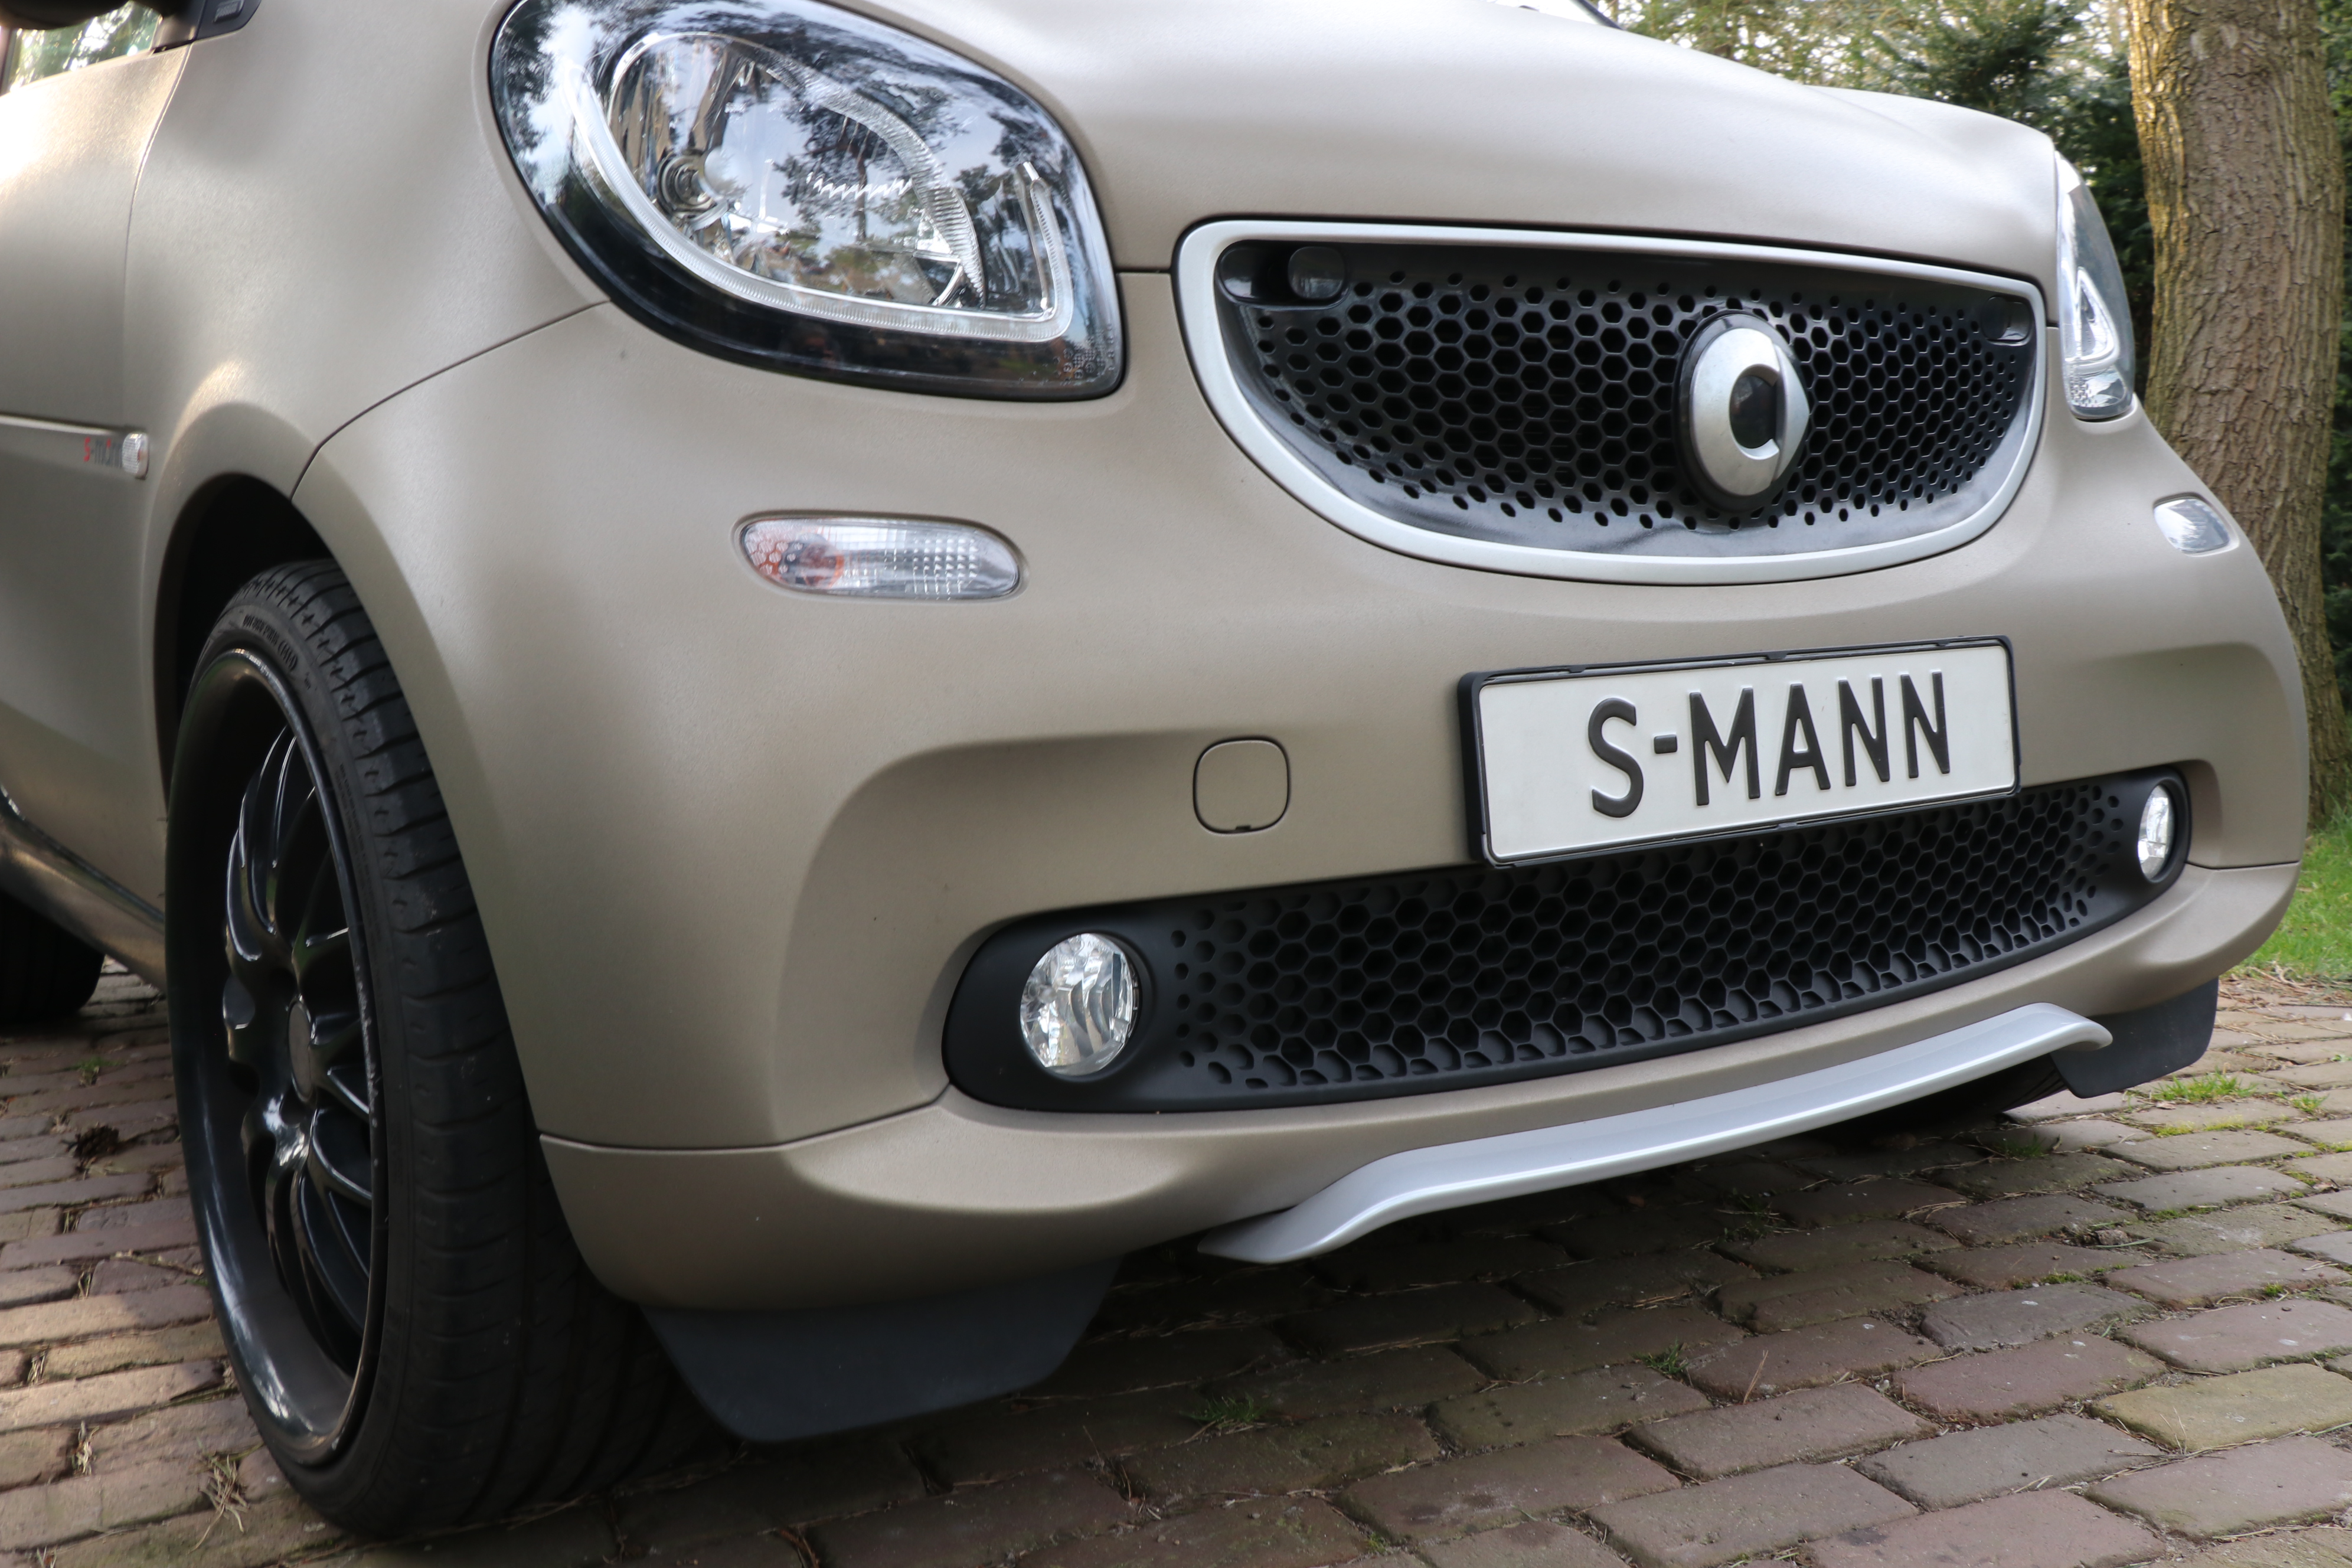 S-Mann - Specialized in products for all Smart models.